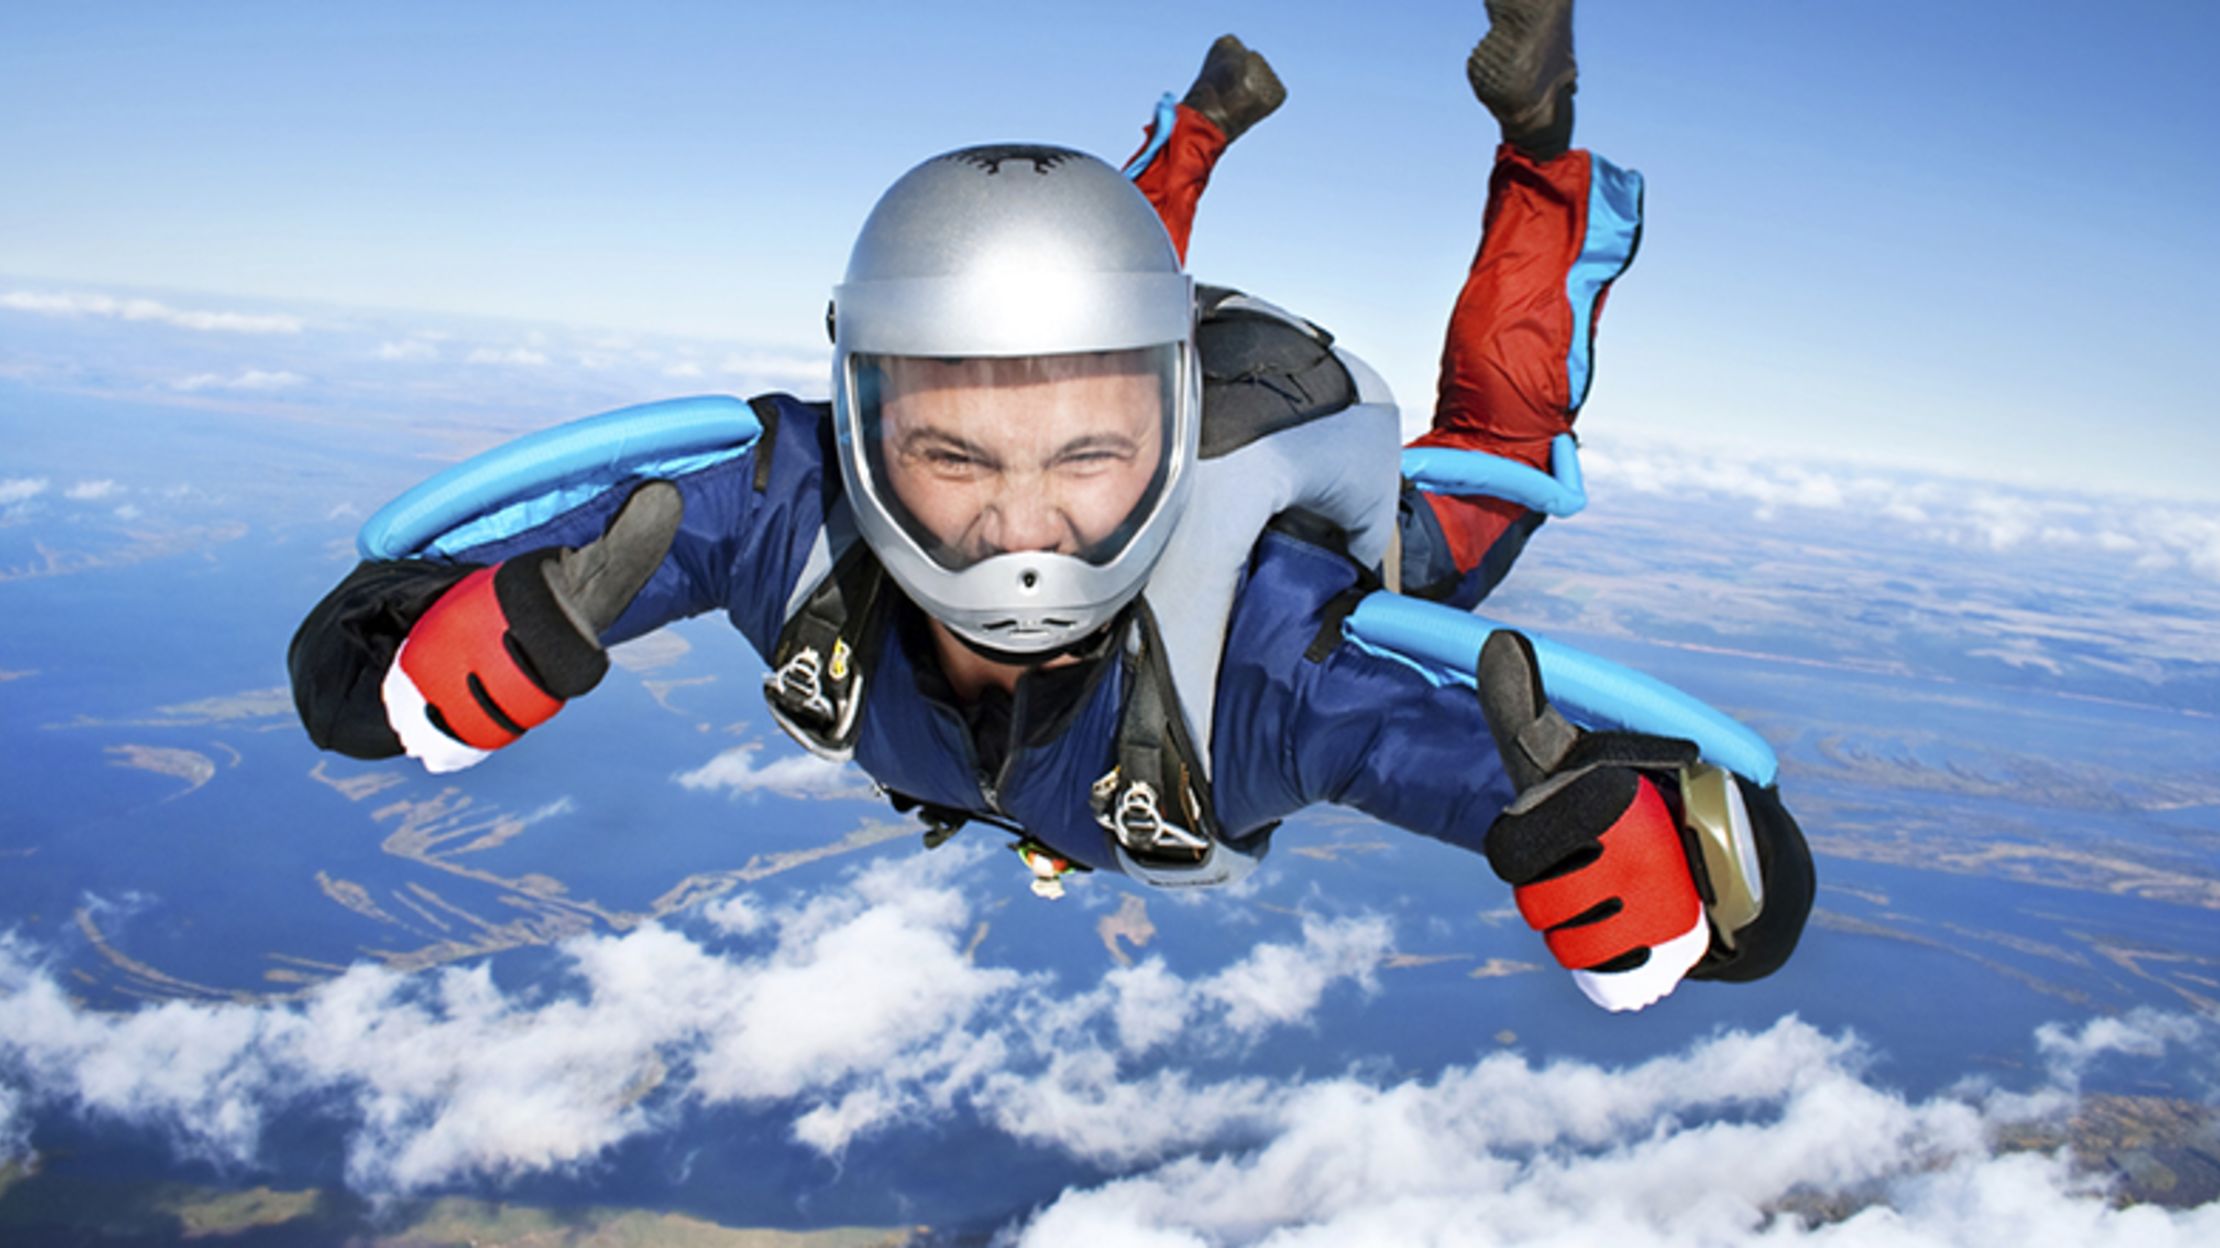 3 Ways to Get an Adrenaline Rush - wikiHow